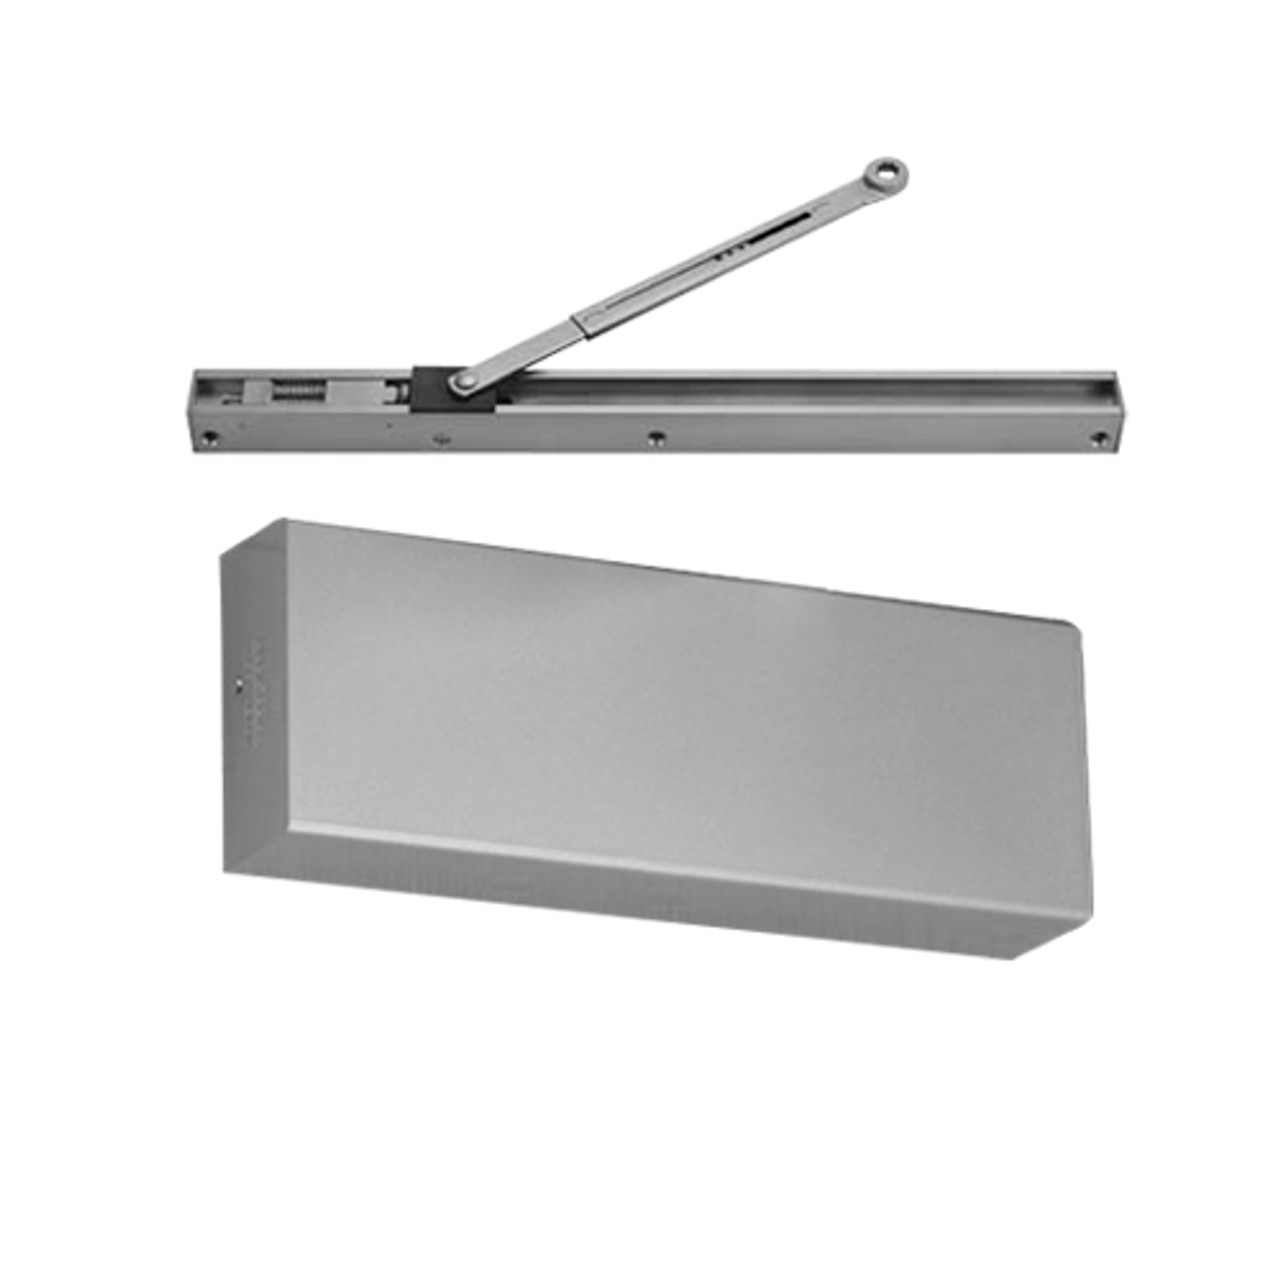 9500STHDA-689 Norton 9500 Series Hold Open Cast Iron Door Closer with Pull Side Slide Track in Aluminum Finish